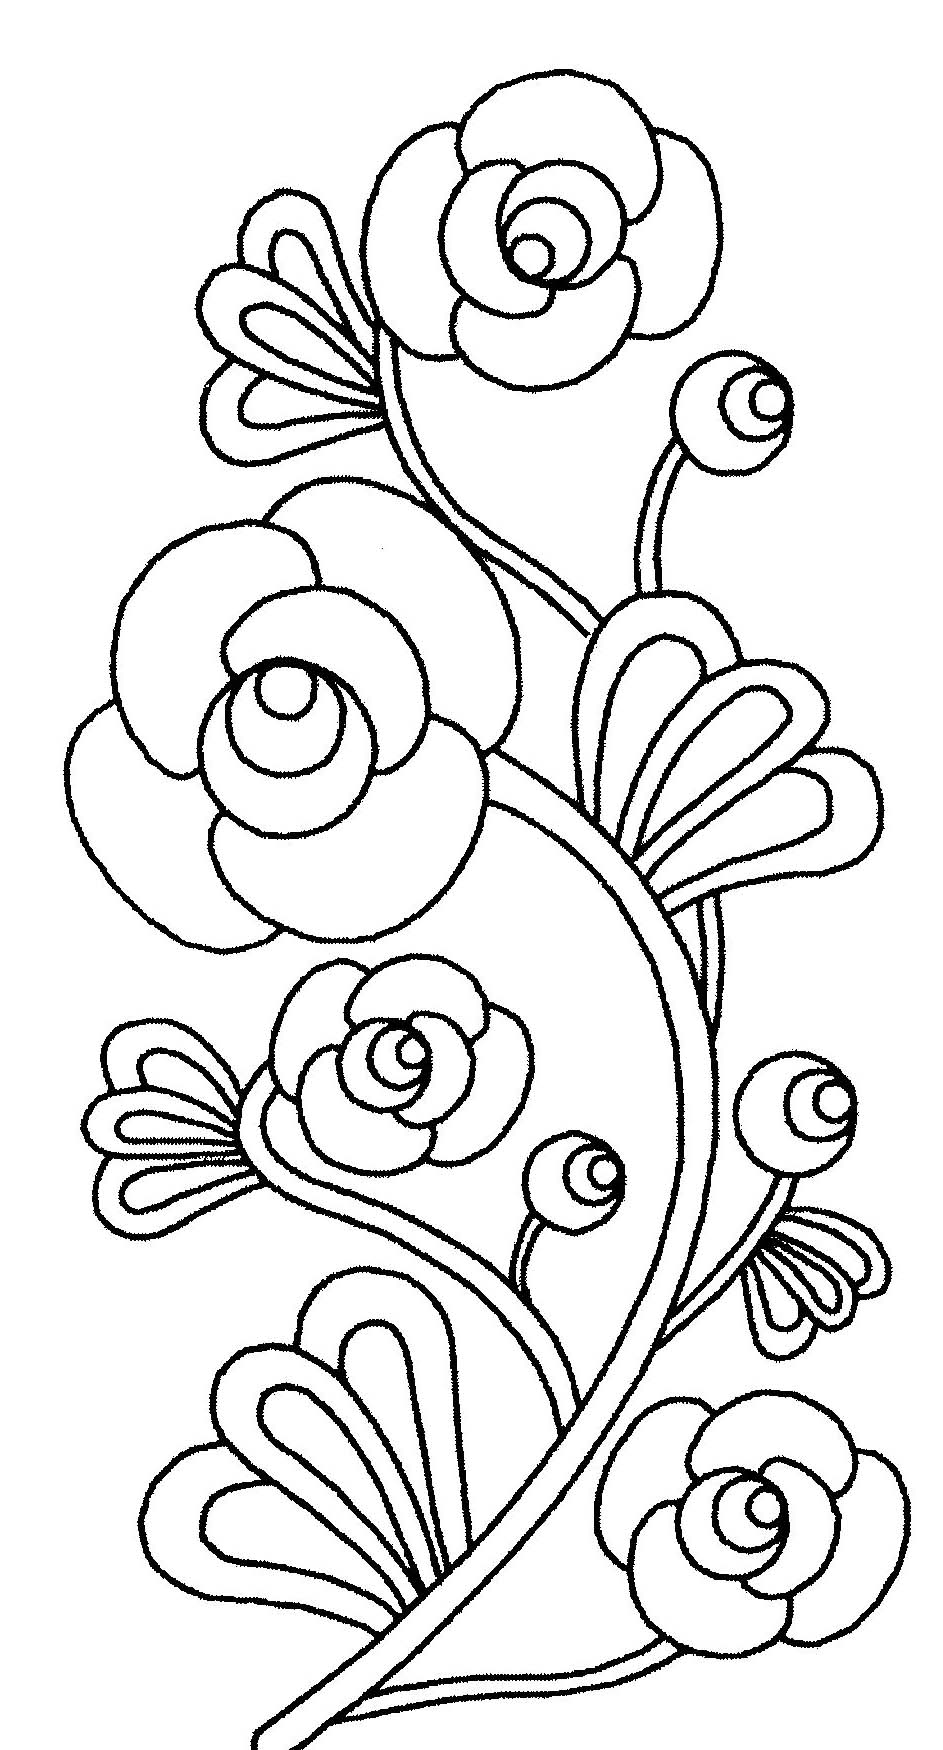 Drawing of flowers to print and color